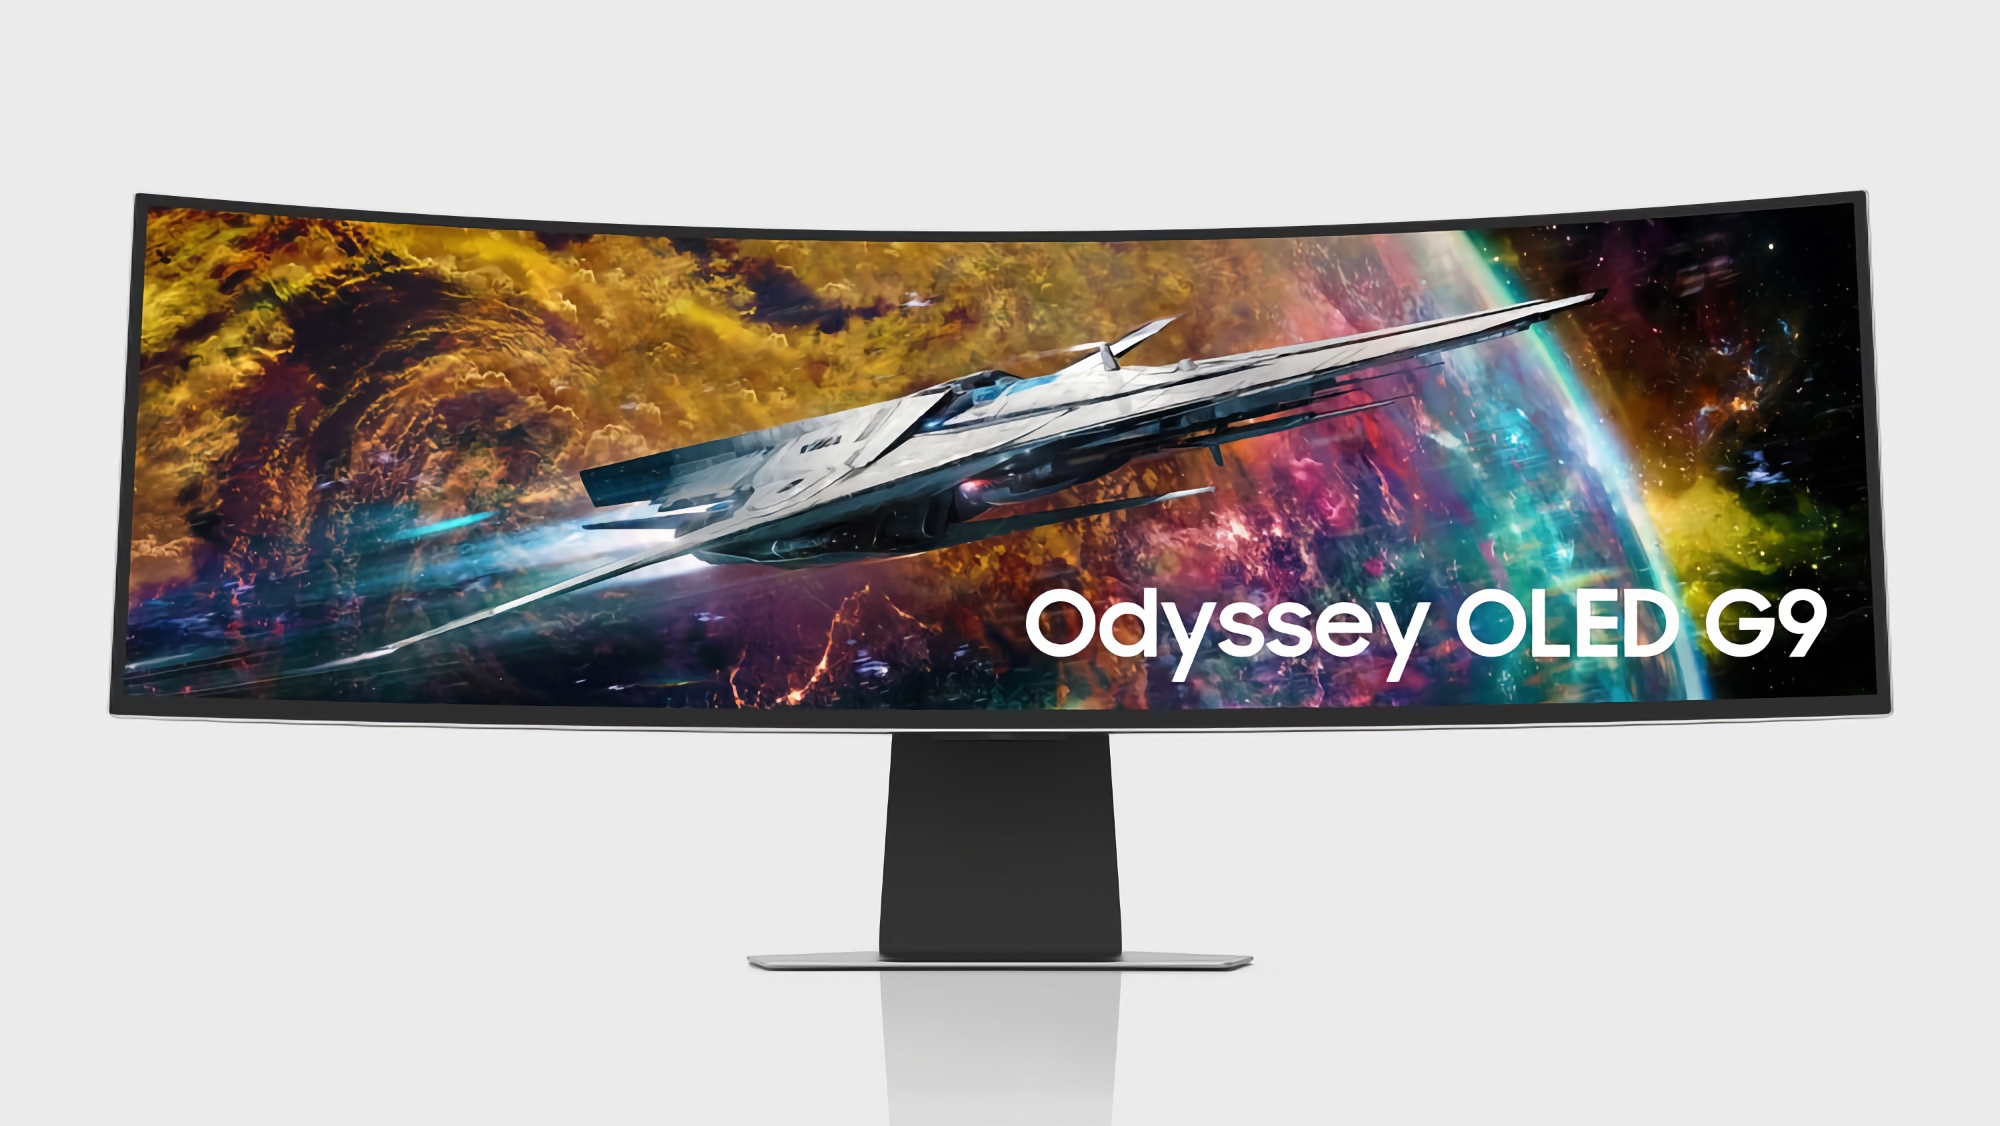 When and how much the Samsung Odyssey OLED G9 with 240Hz screen will be released and what will be the price